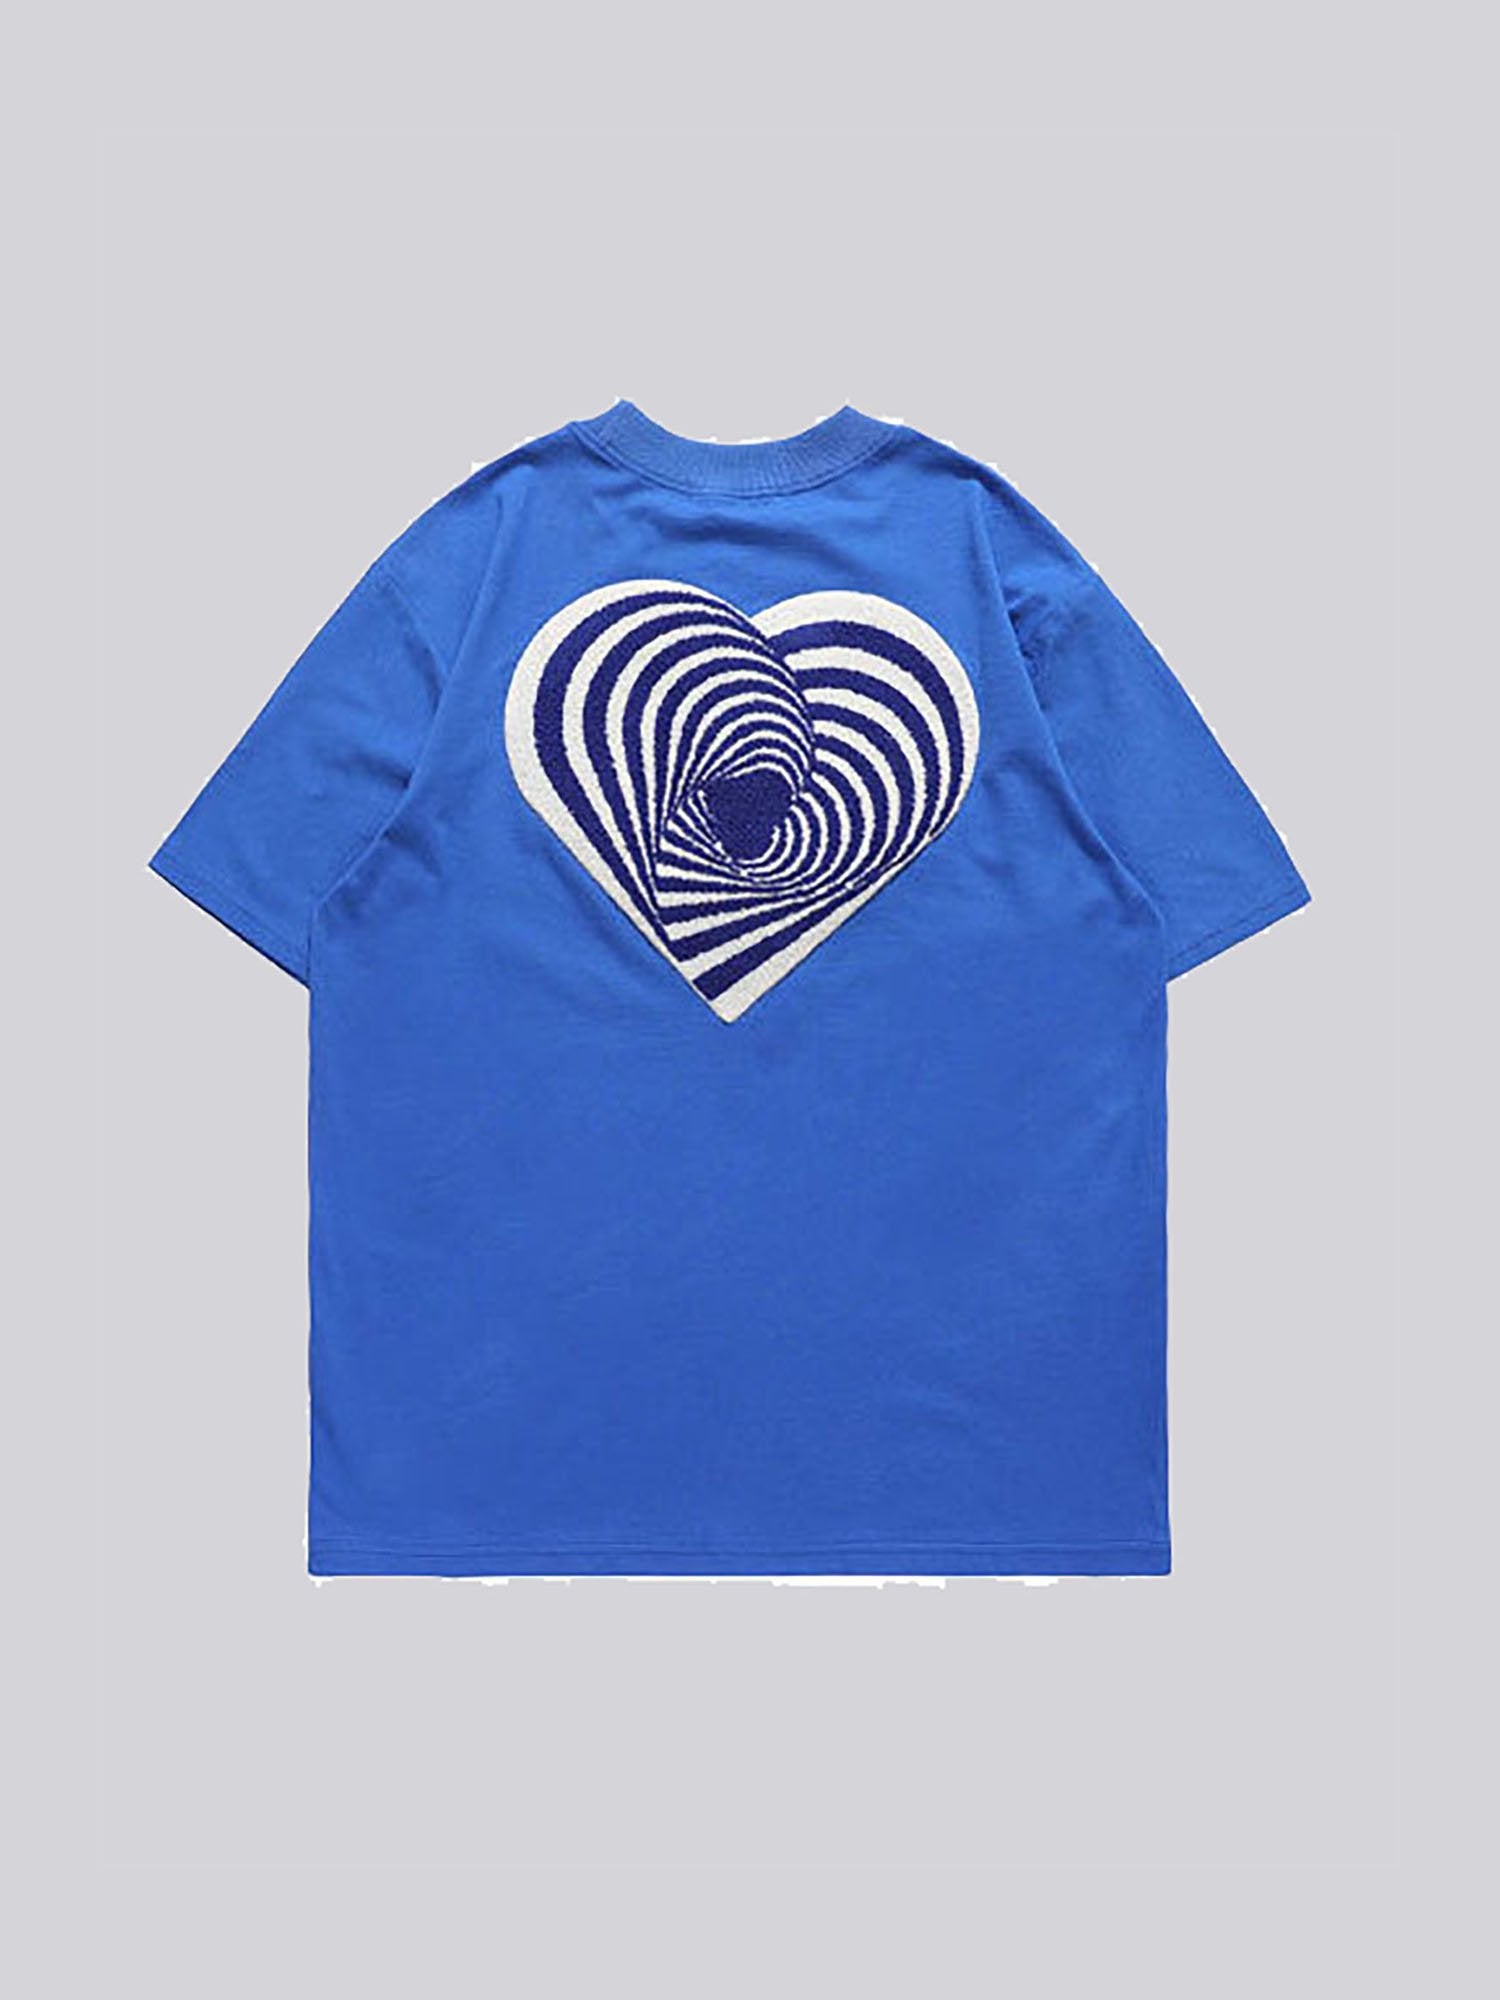 JUSTNOTAG Letter Spiral Heart Towel EmbroideryShort Sleeve Tee